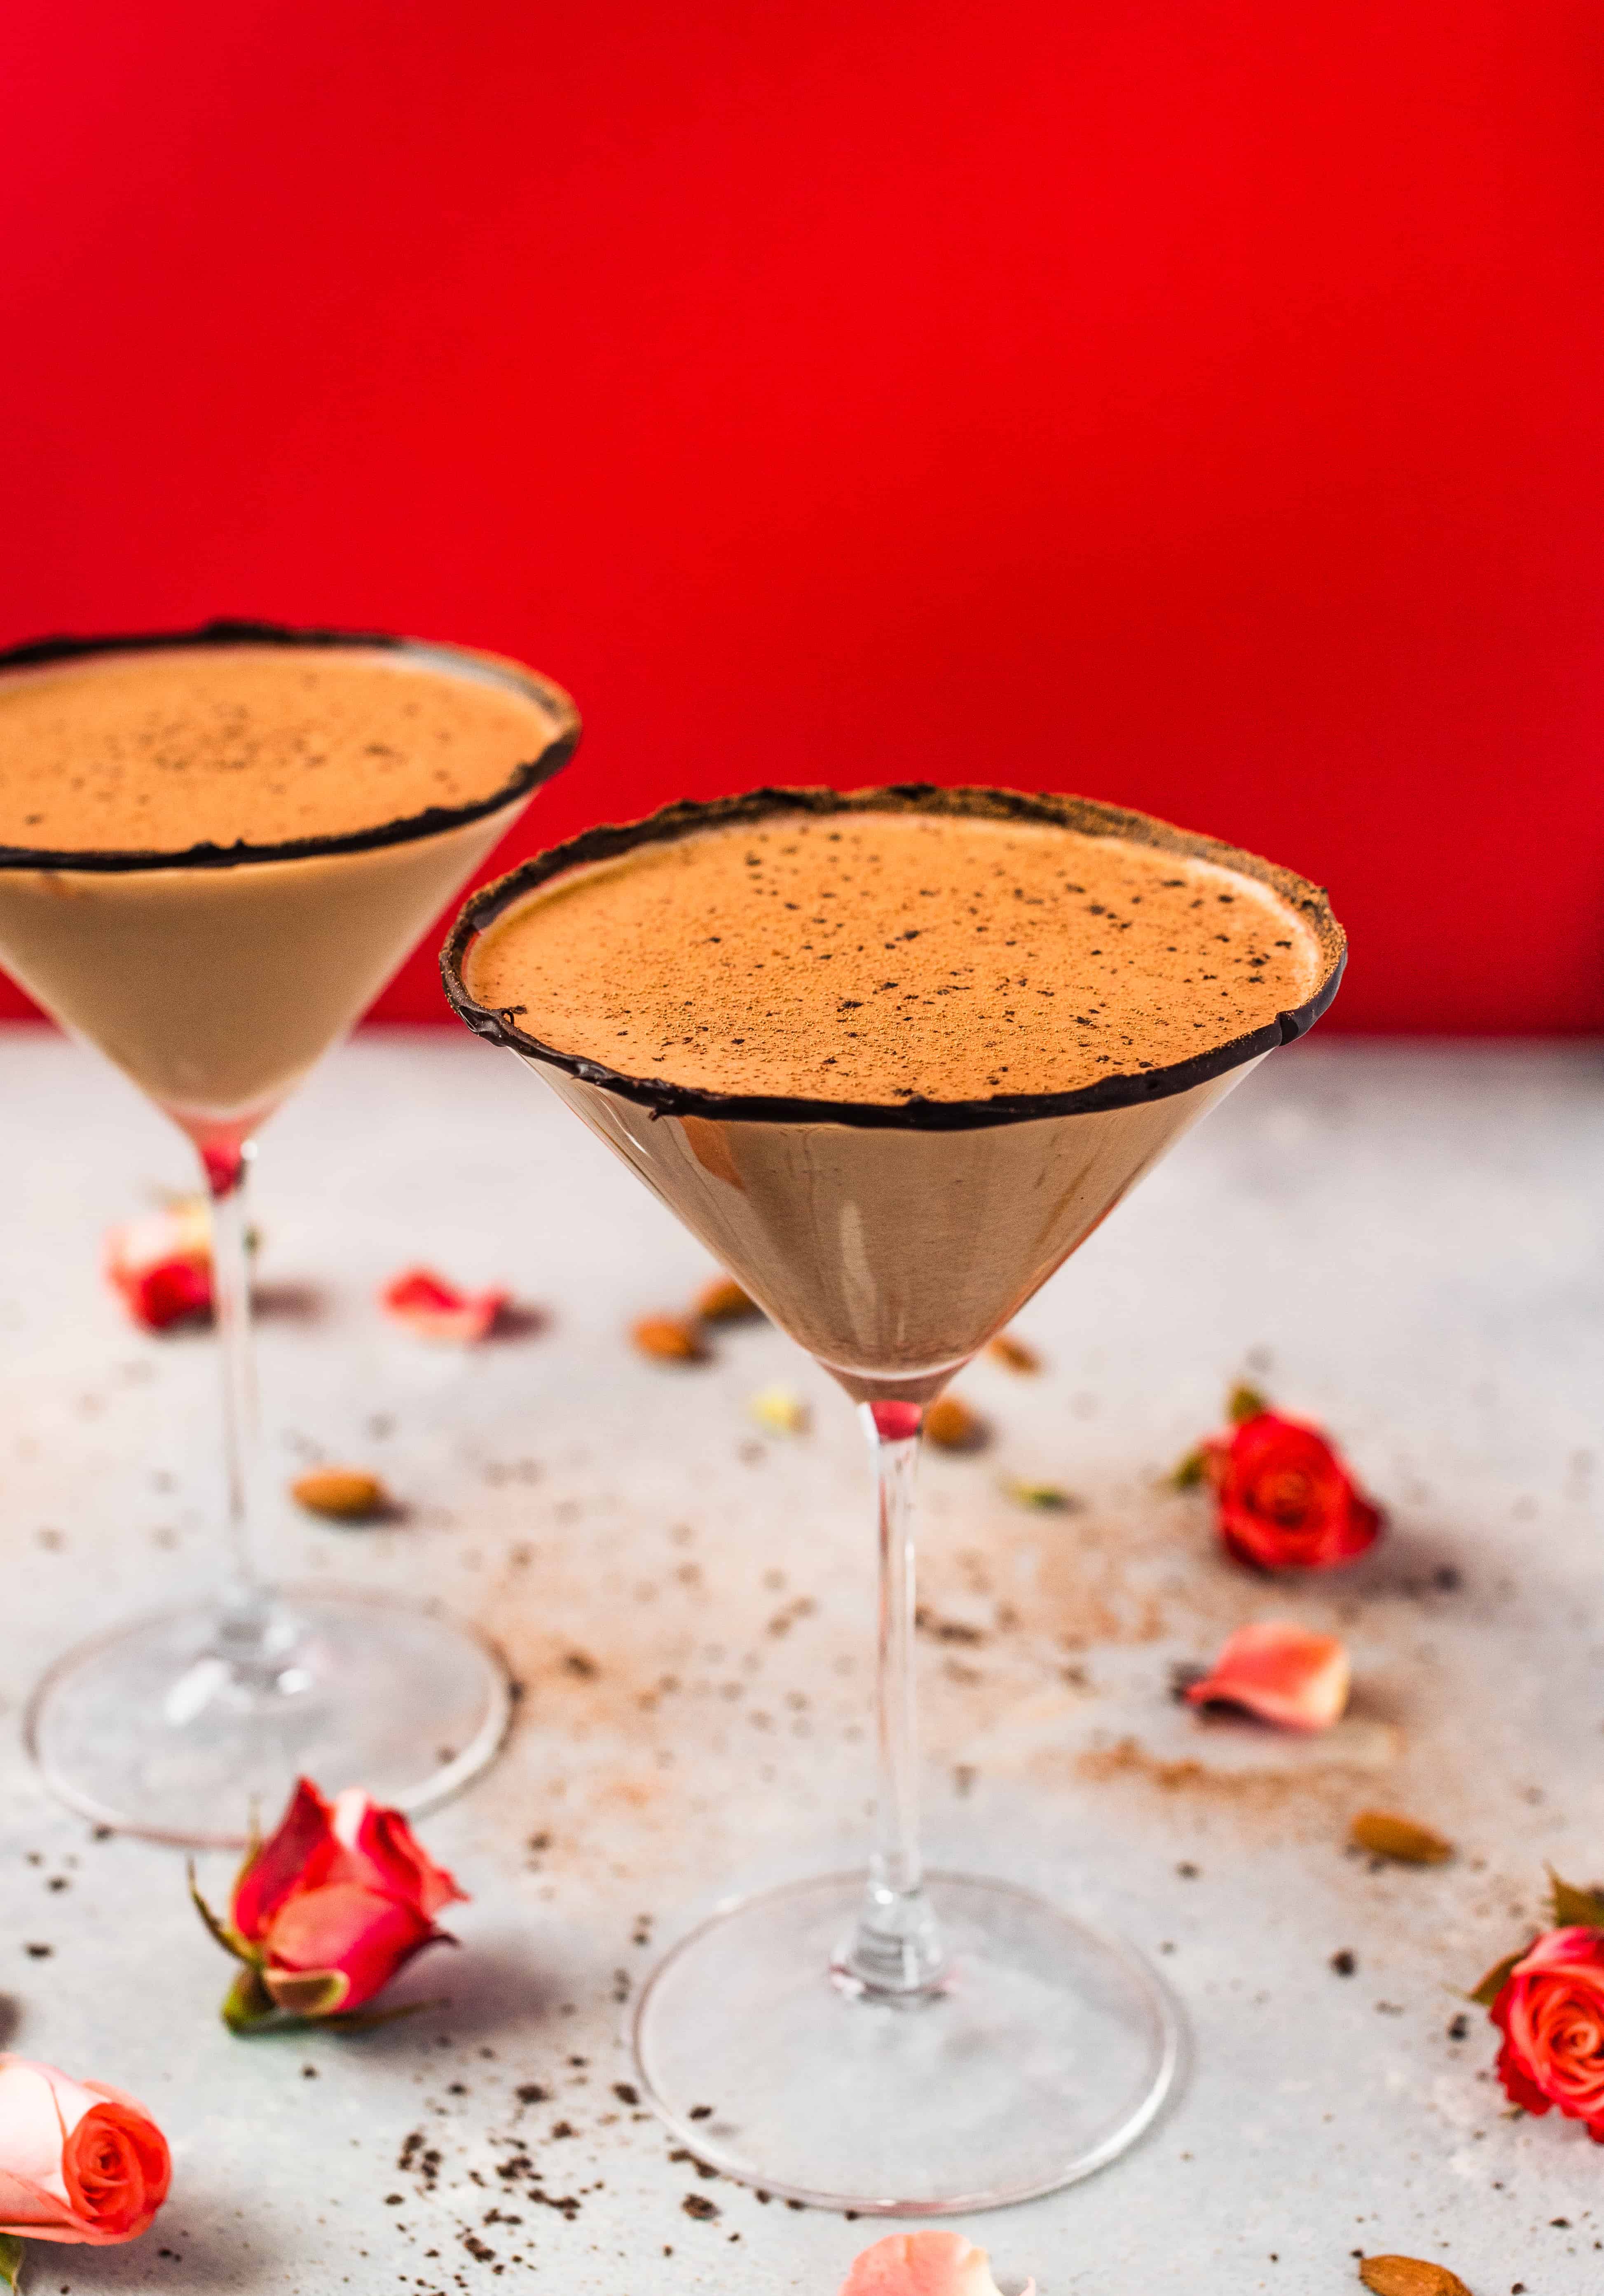 The best Chocolate Almond Martini for a special occasion